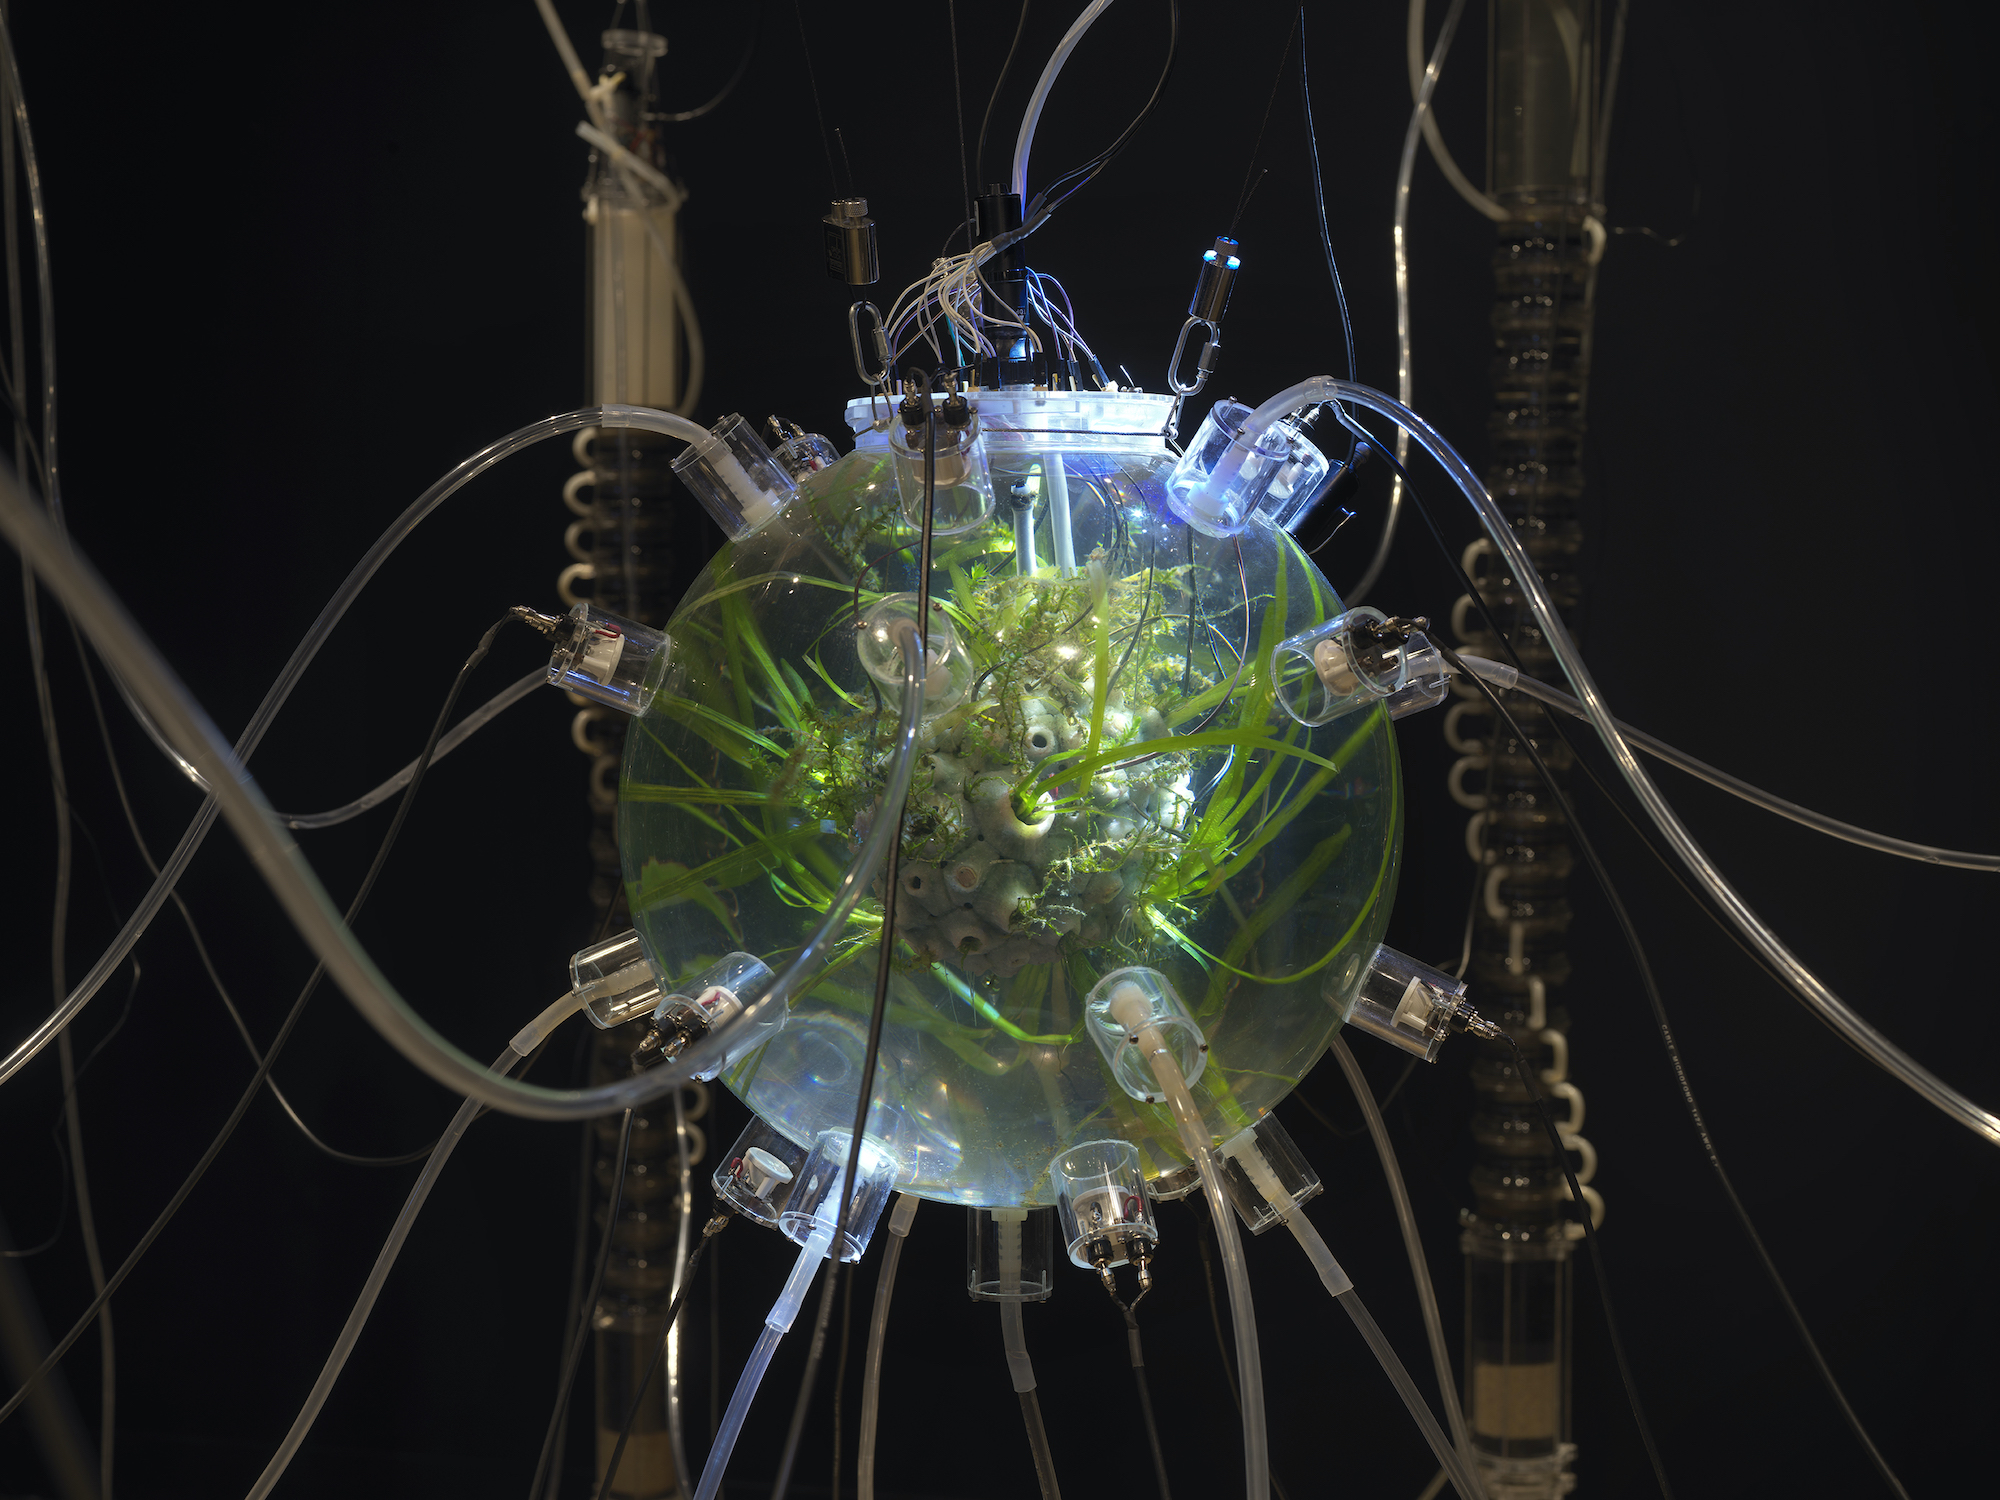 Detail view of a clear orb containing water, aquatic plants and small fish. Knobby protrusions on the orb’s exterior connect to clear tubing.